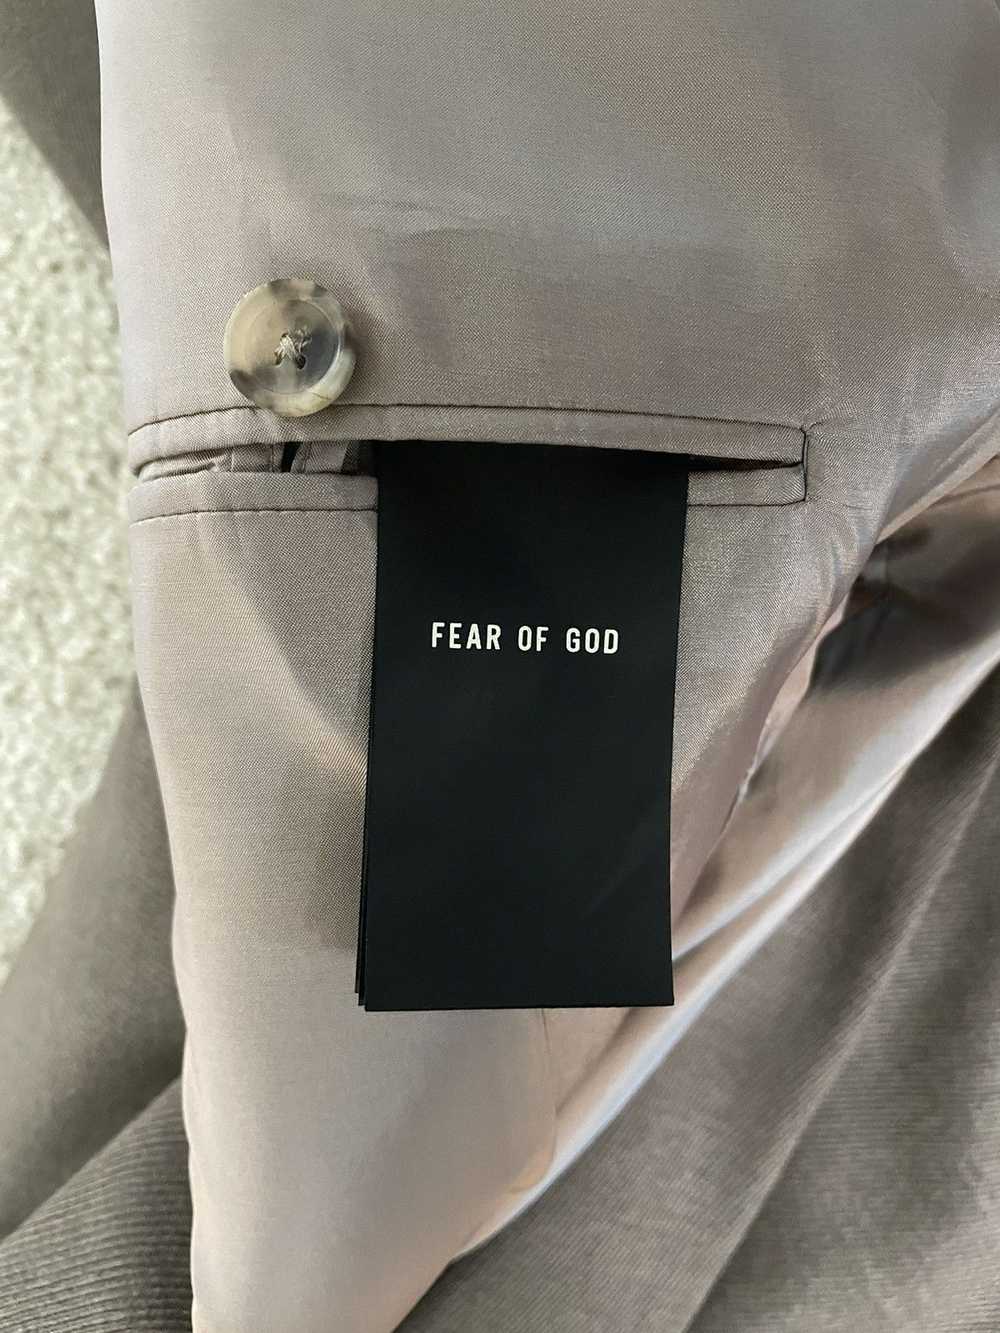 Fear of God 7th. Collection “The Suit Jacket” - image 6